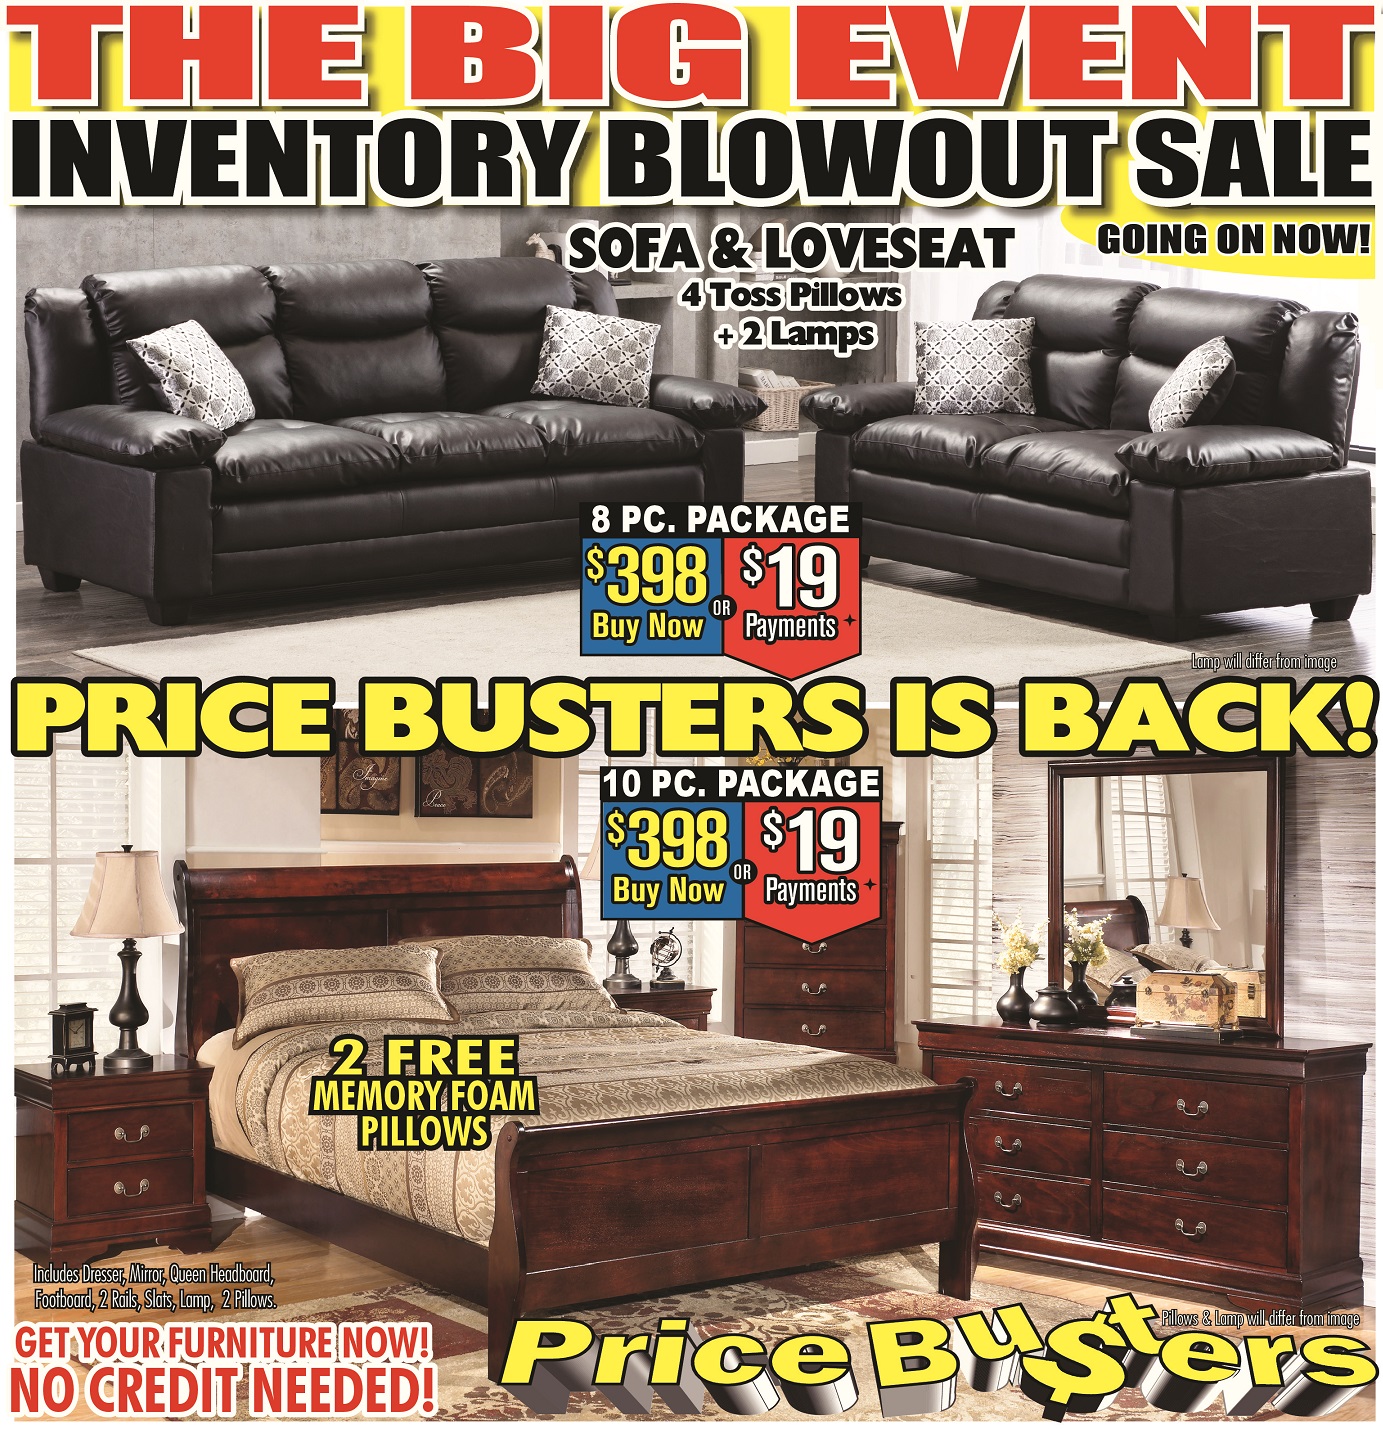 Price Busters Discount Furniture 5103 Ritchie Hwy Brooklyn Md 21225 Yp Com,Corn On The Cob Costume